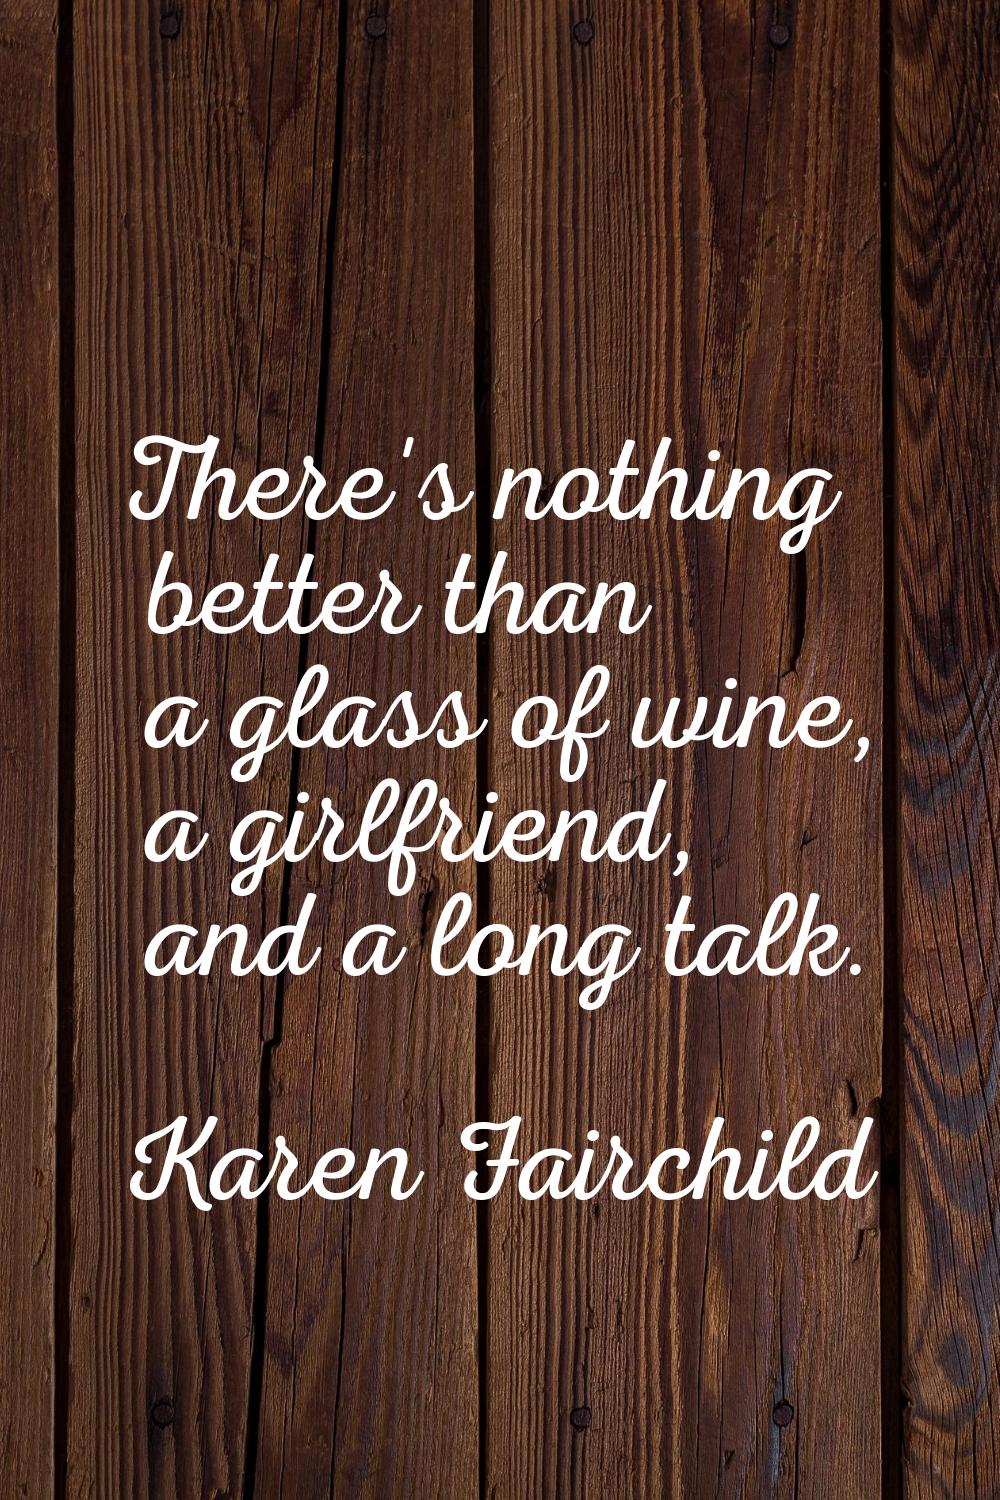 There's nothing better than a glass of wine, a girlfriend, and a long talk.